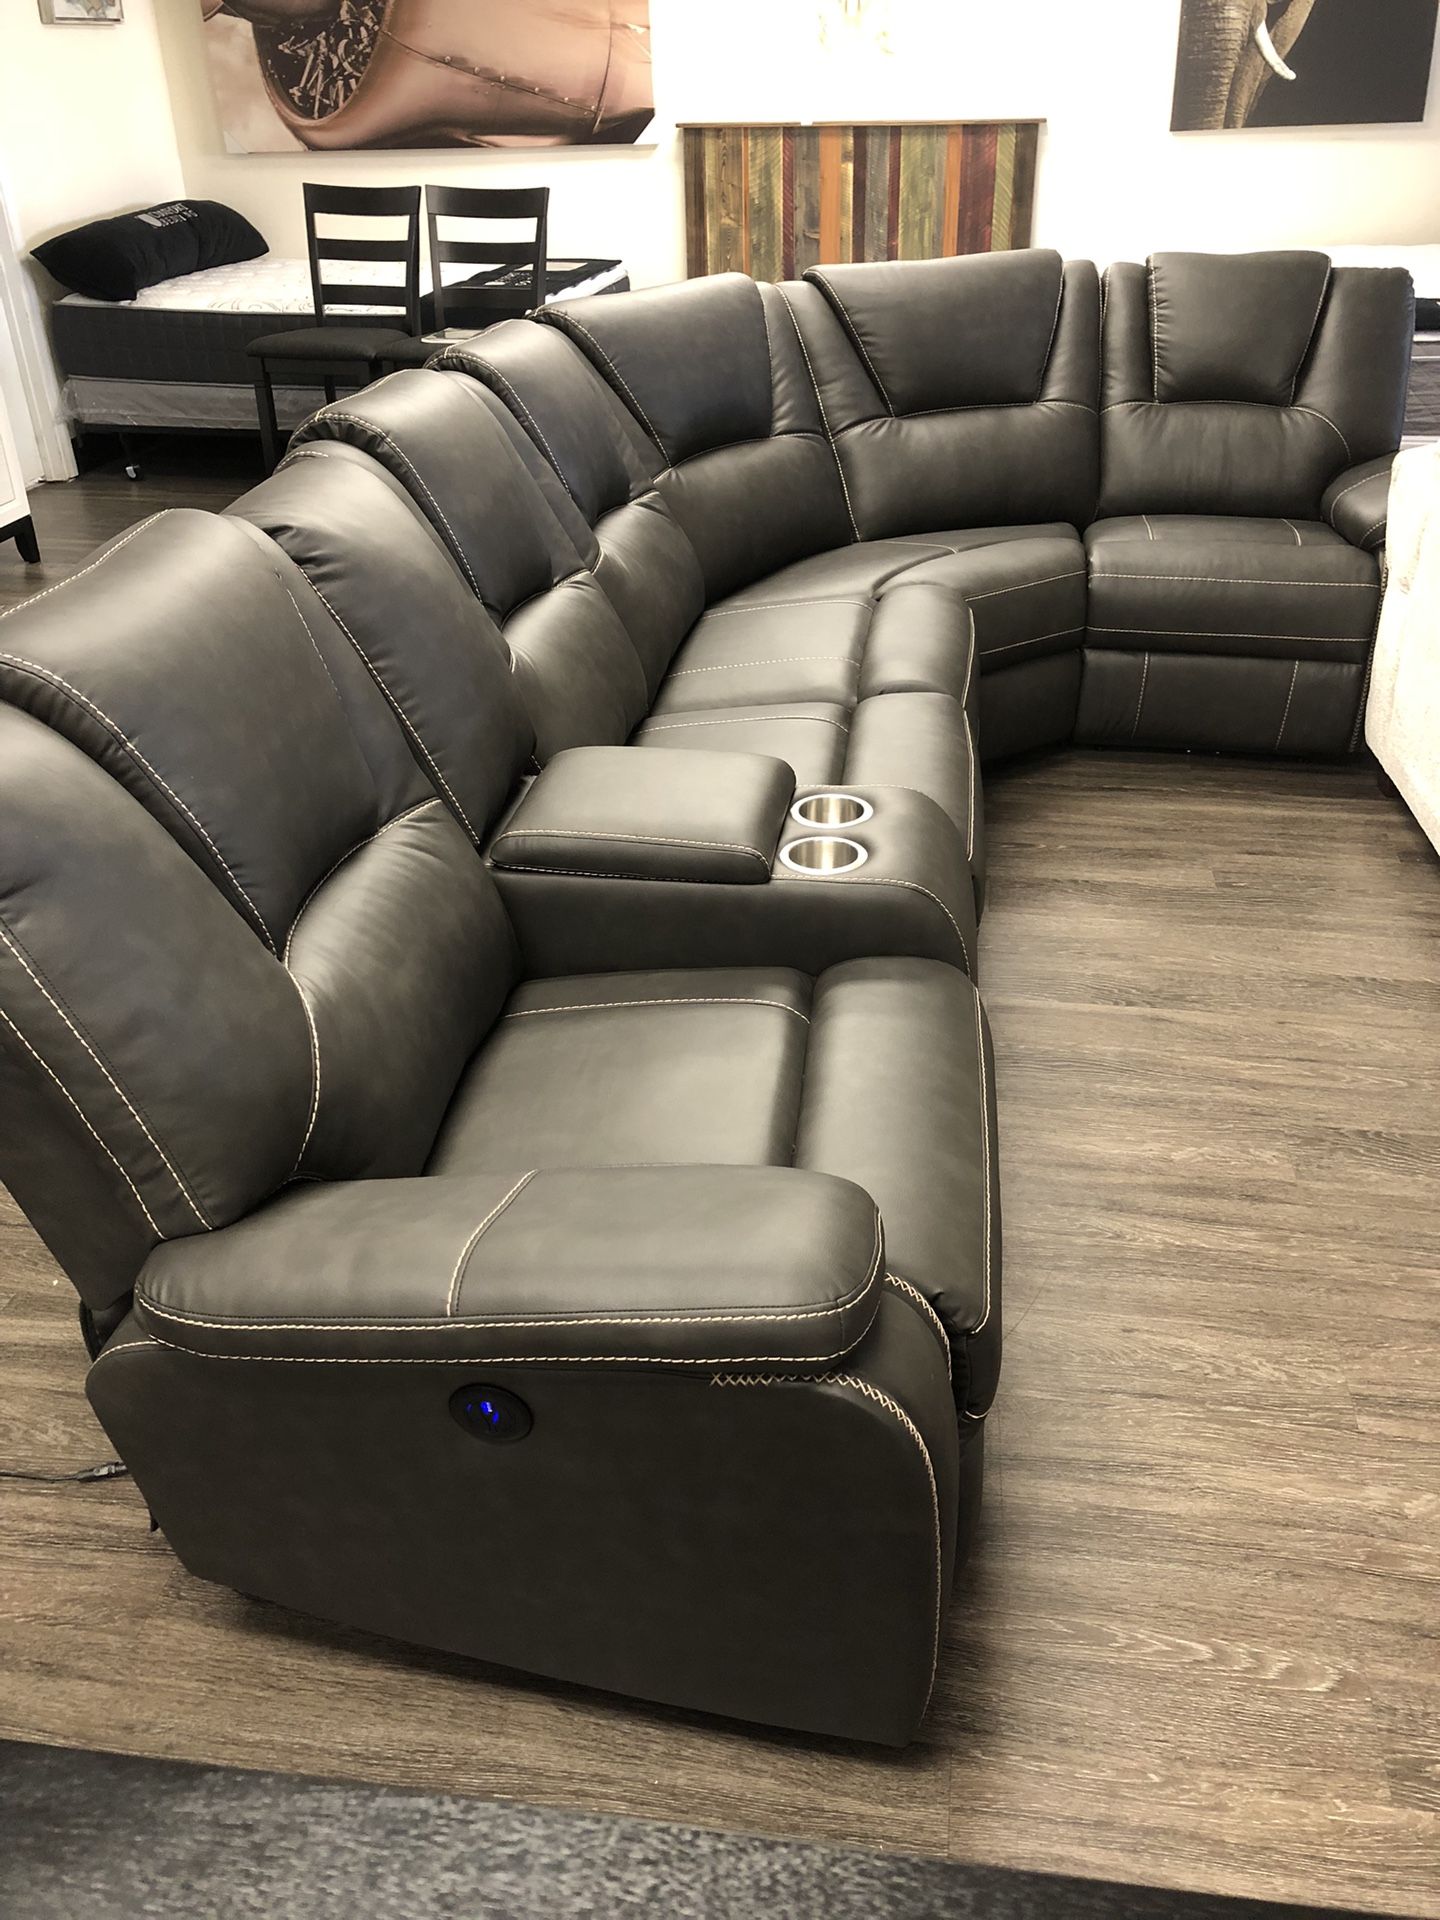 New~ Still In Box Leather Sofa Recliner Sectional 